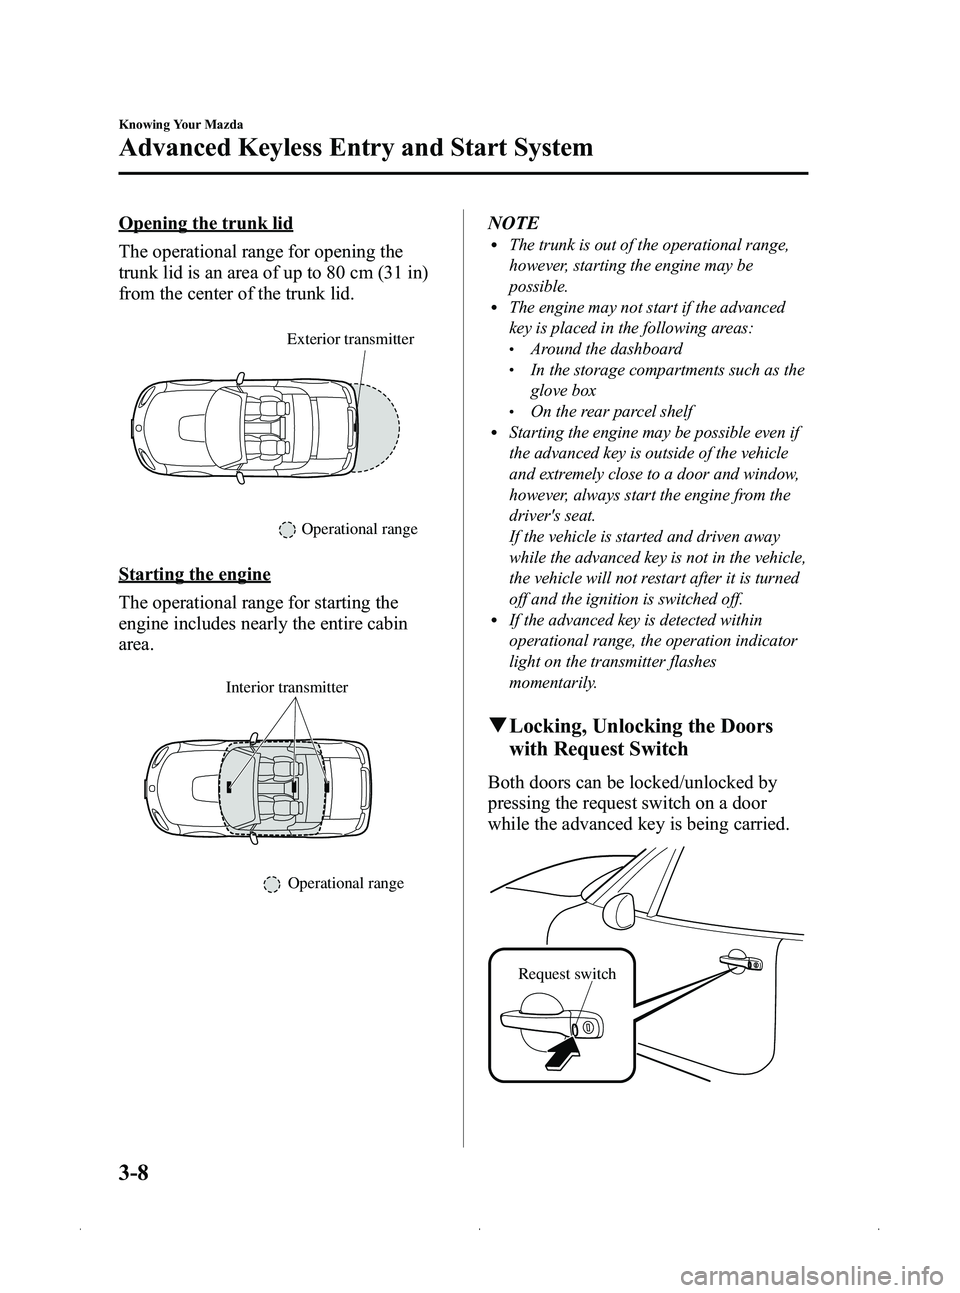 MAZDA MODEL MX-5 MIATA 2012  Owners Manual Black plate (72,1)
Opening the trunk lid
The operational range for opening the
trunk lid is an area of up to 80 cm (31 in)
from the center of the trunk lid.
Exterior transmitter
Operational range
Star